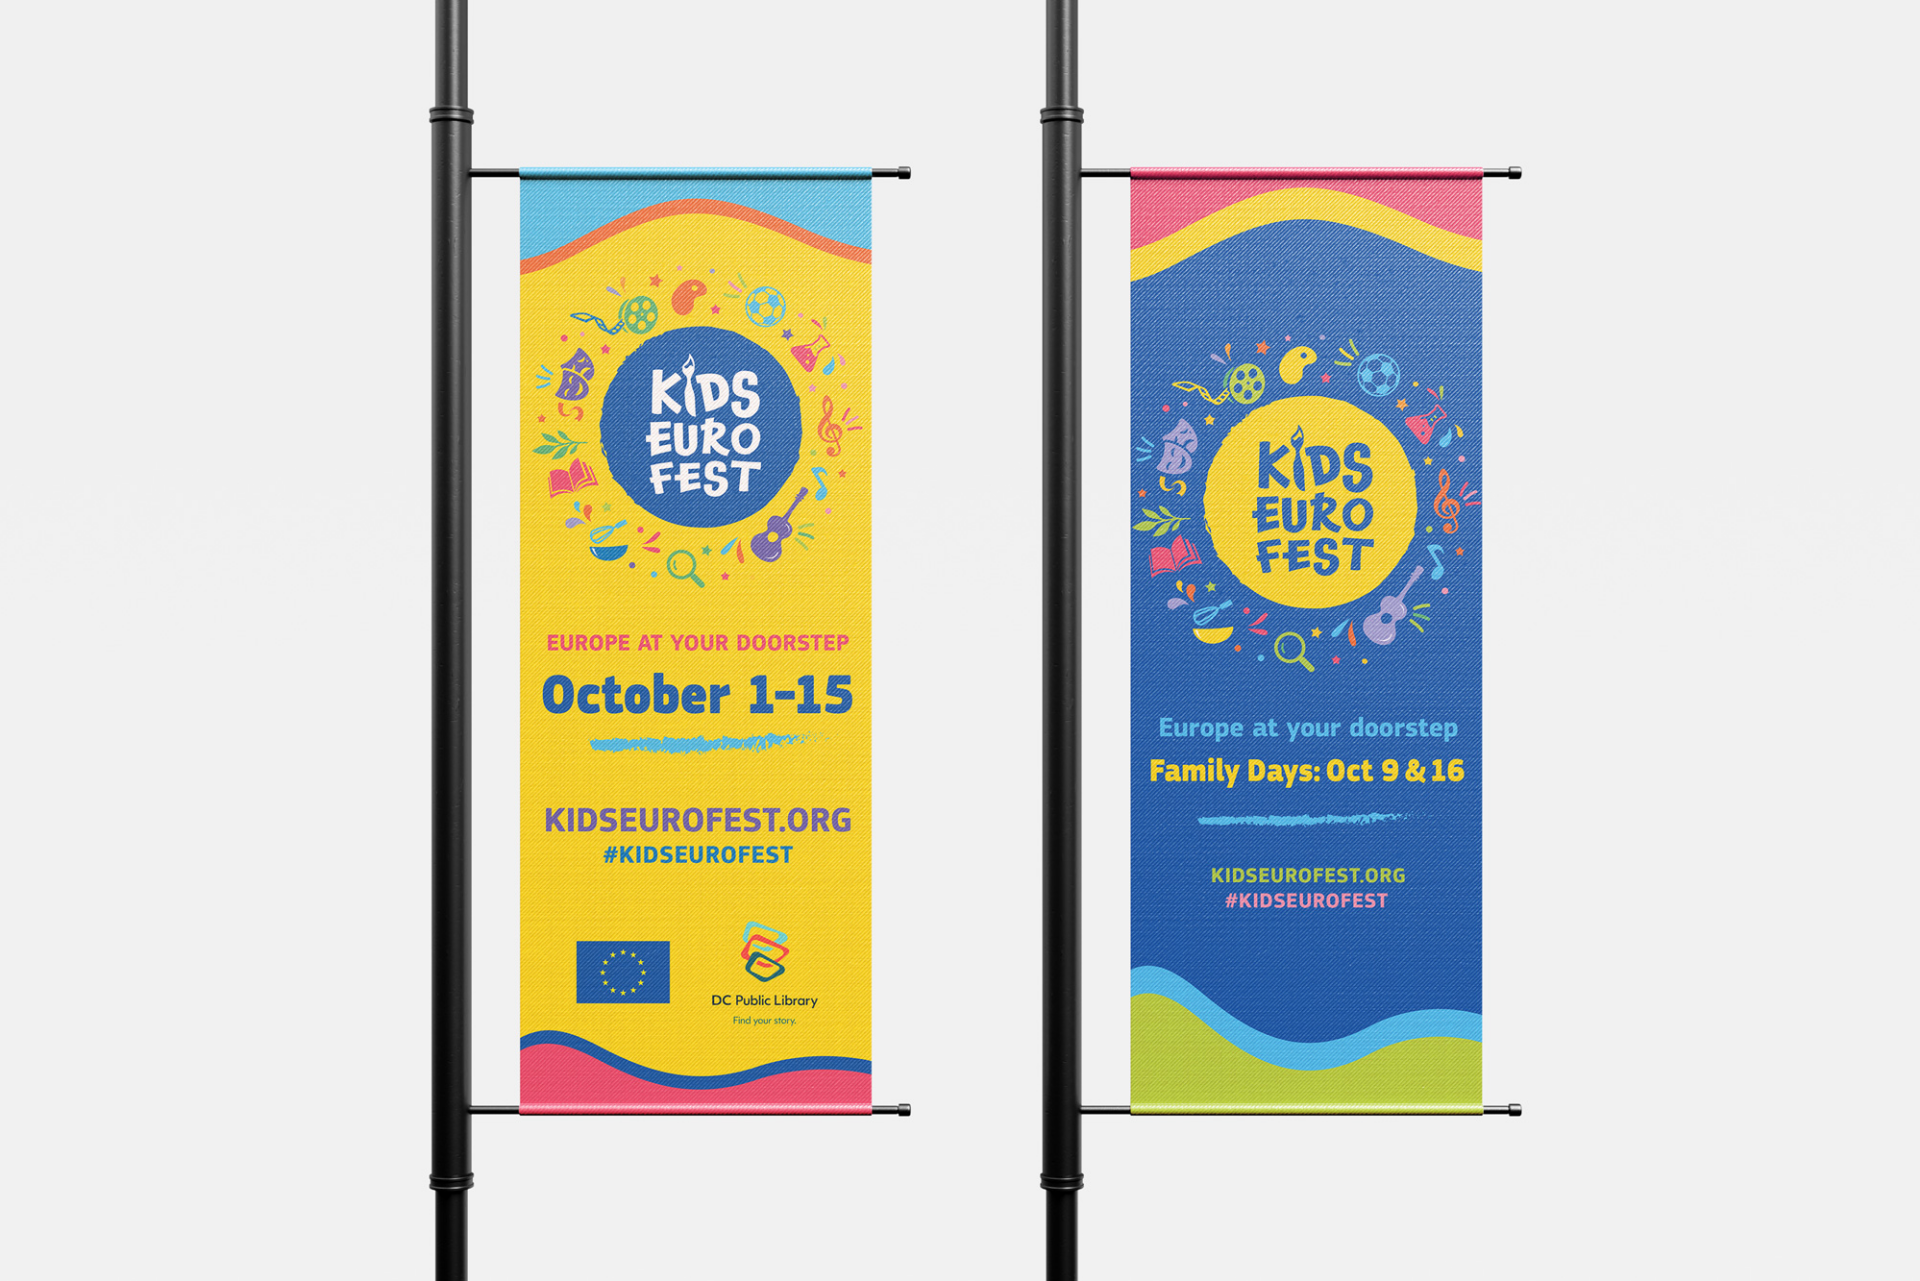 Two colorful banners promoting the "DEU Kids Euro Fest," a cultural festival with activities for children, featuring dates and website information against a backdrop of vibrant graphics.